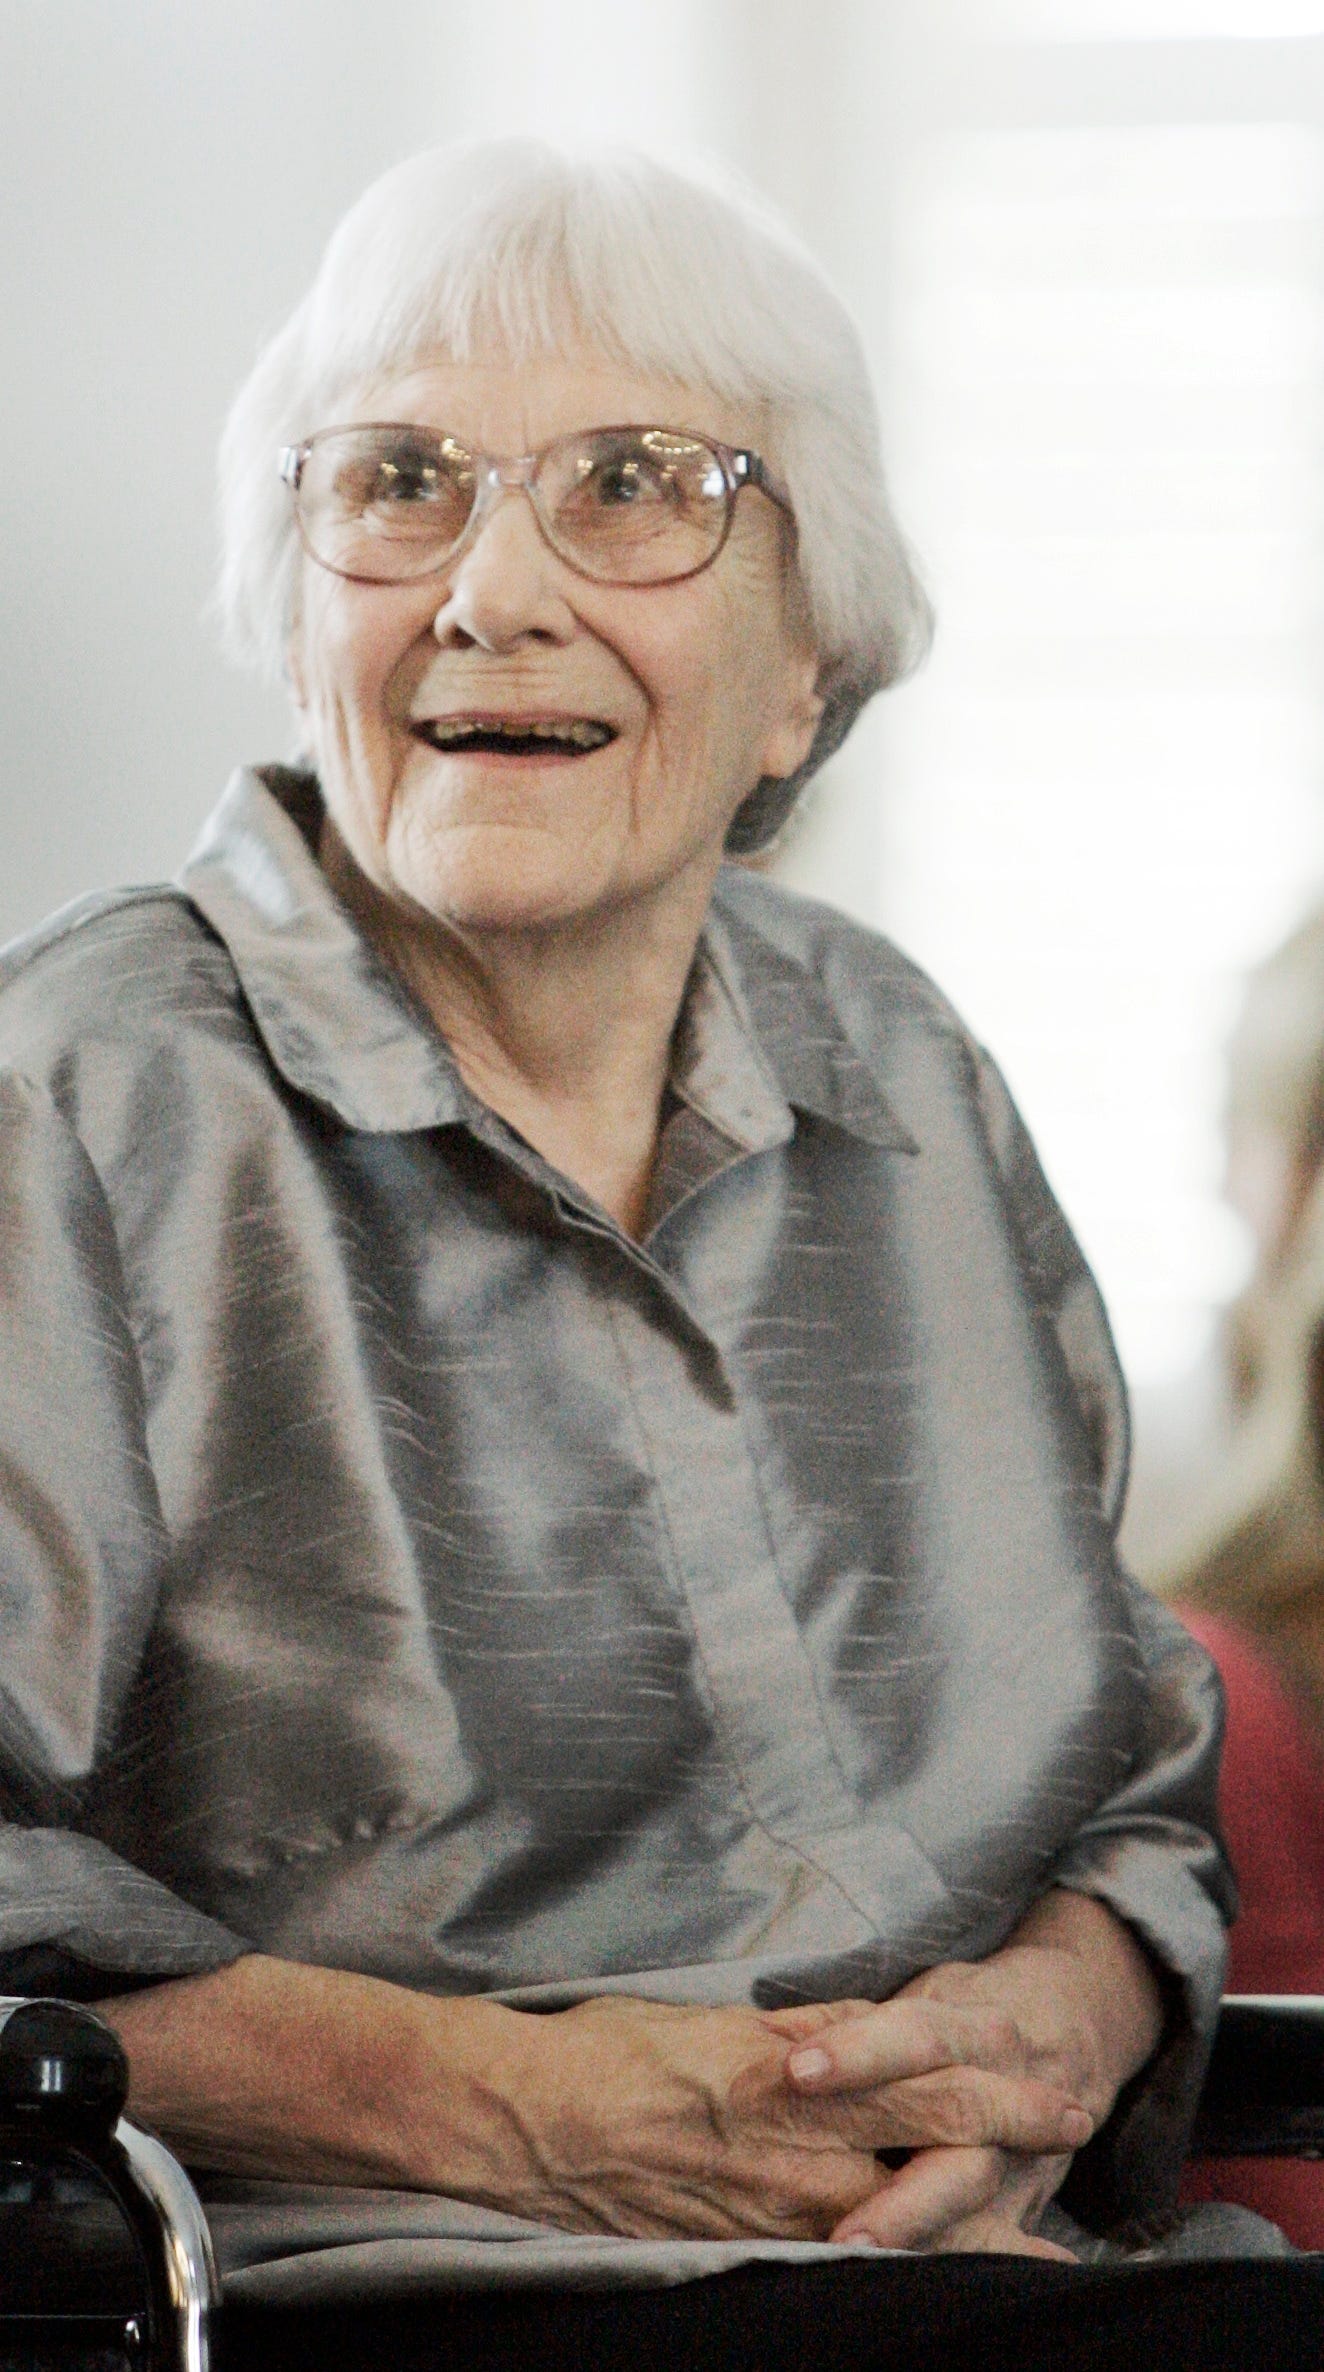 Harper Lee denies she cooperated with new biography